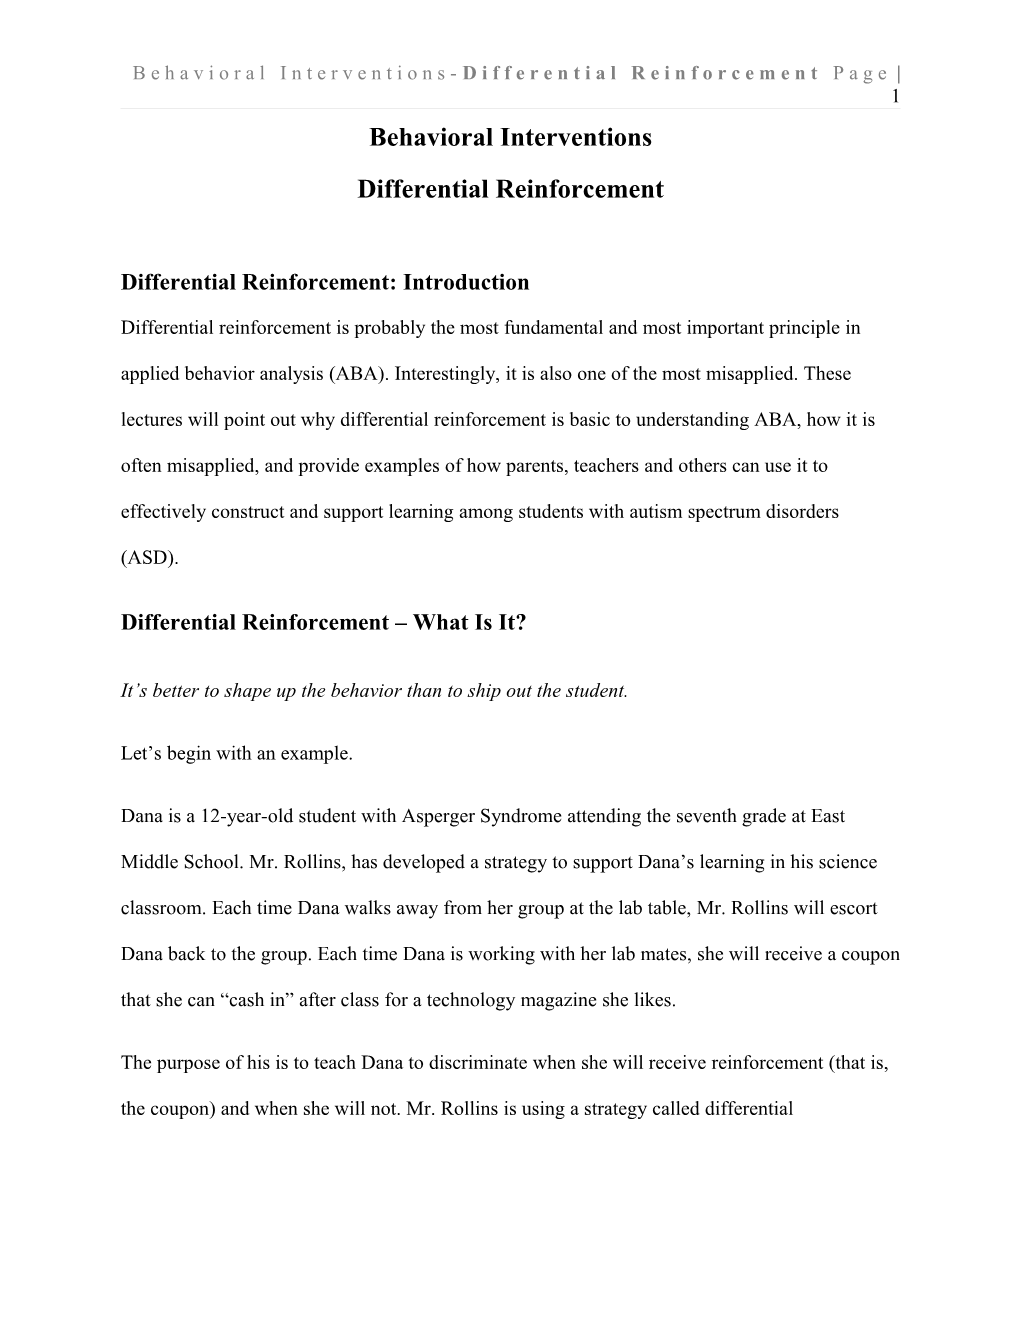 Behavioral Interventions- Differential Reinforcement Page 1